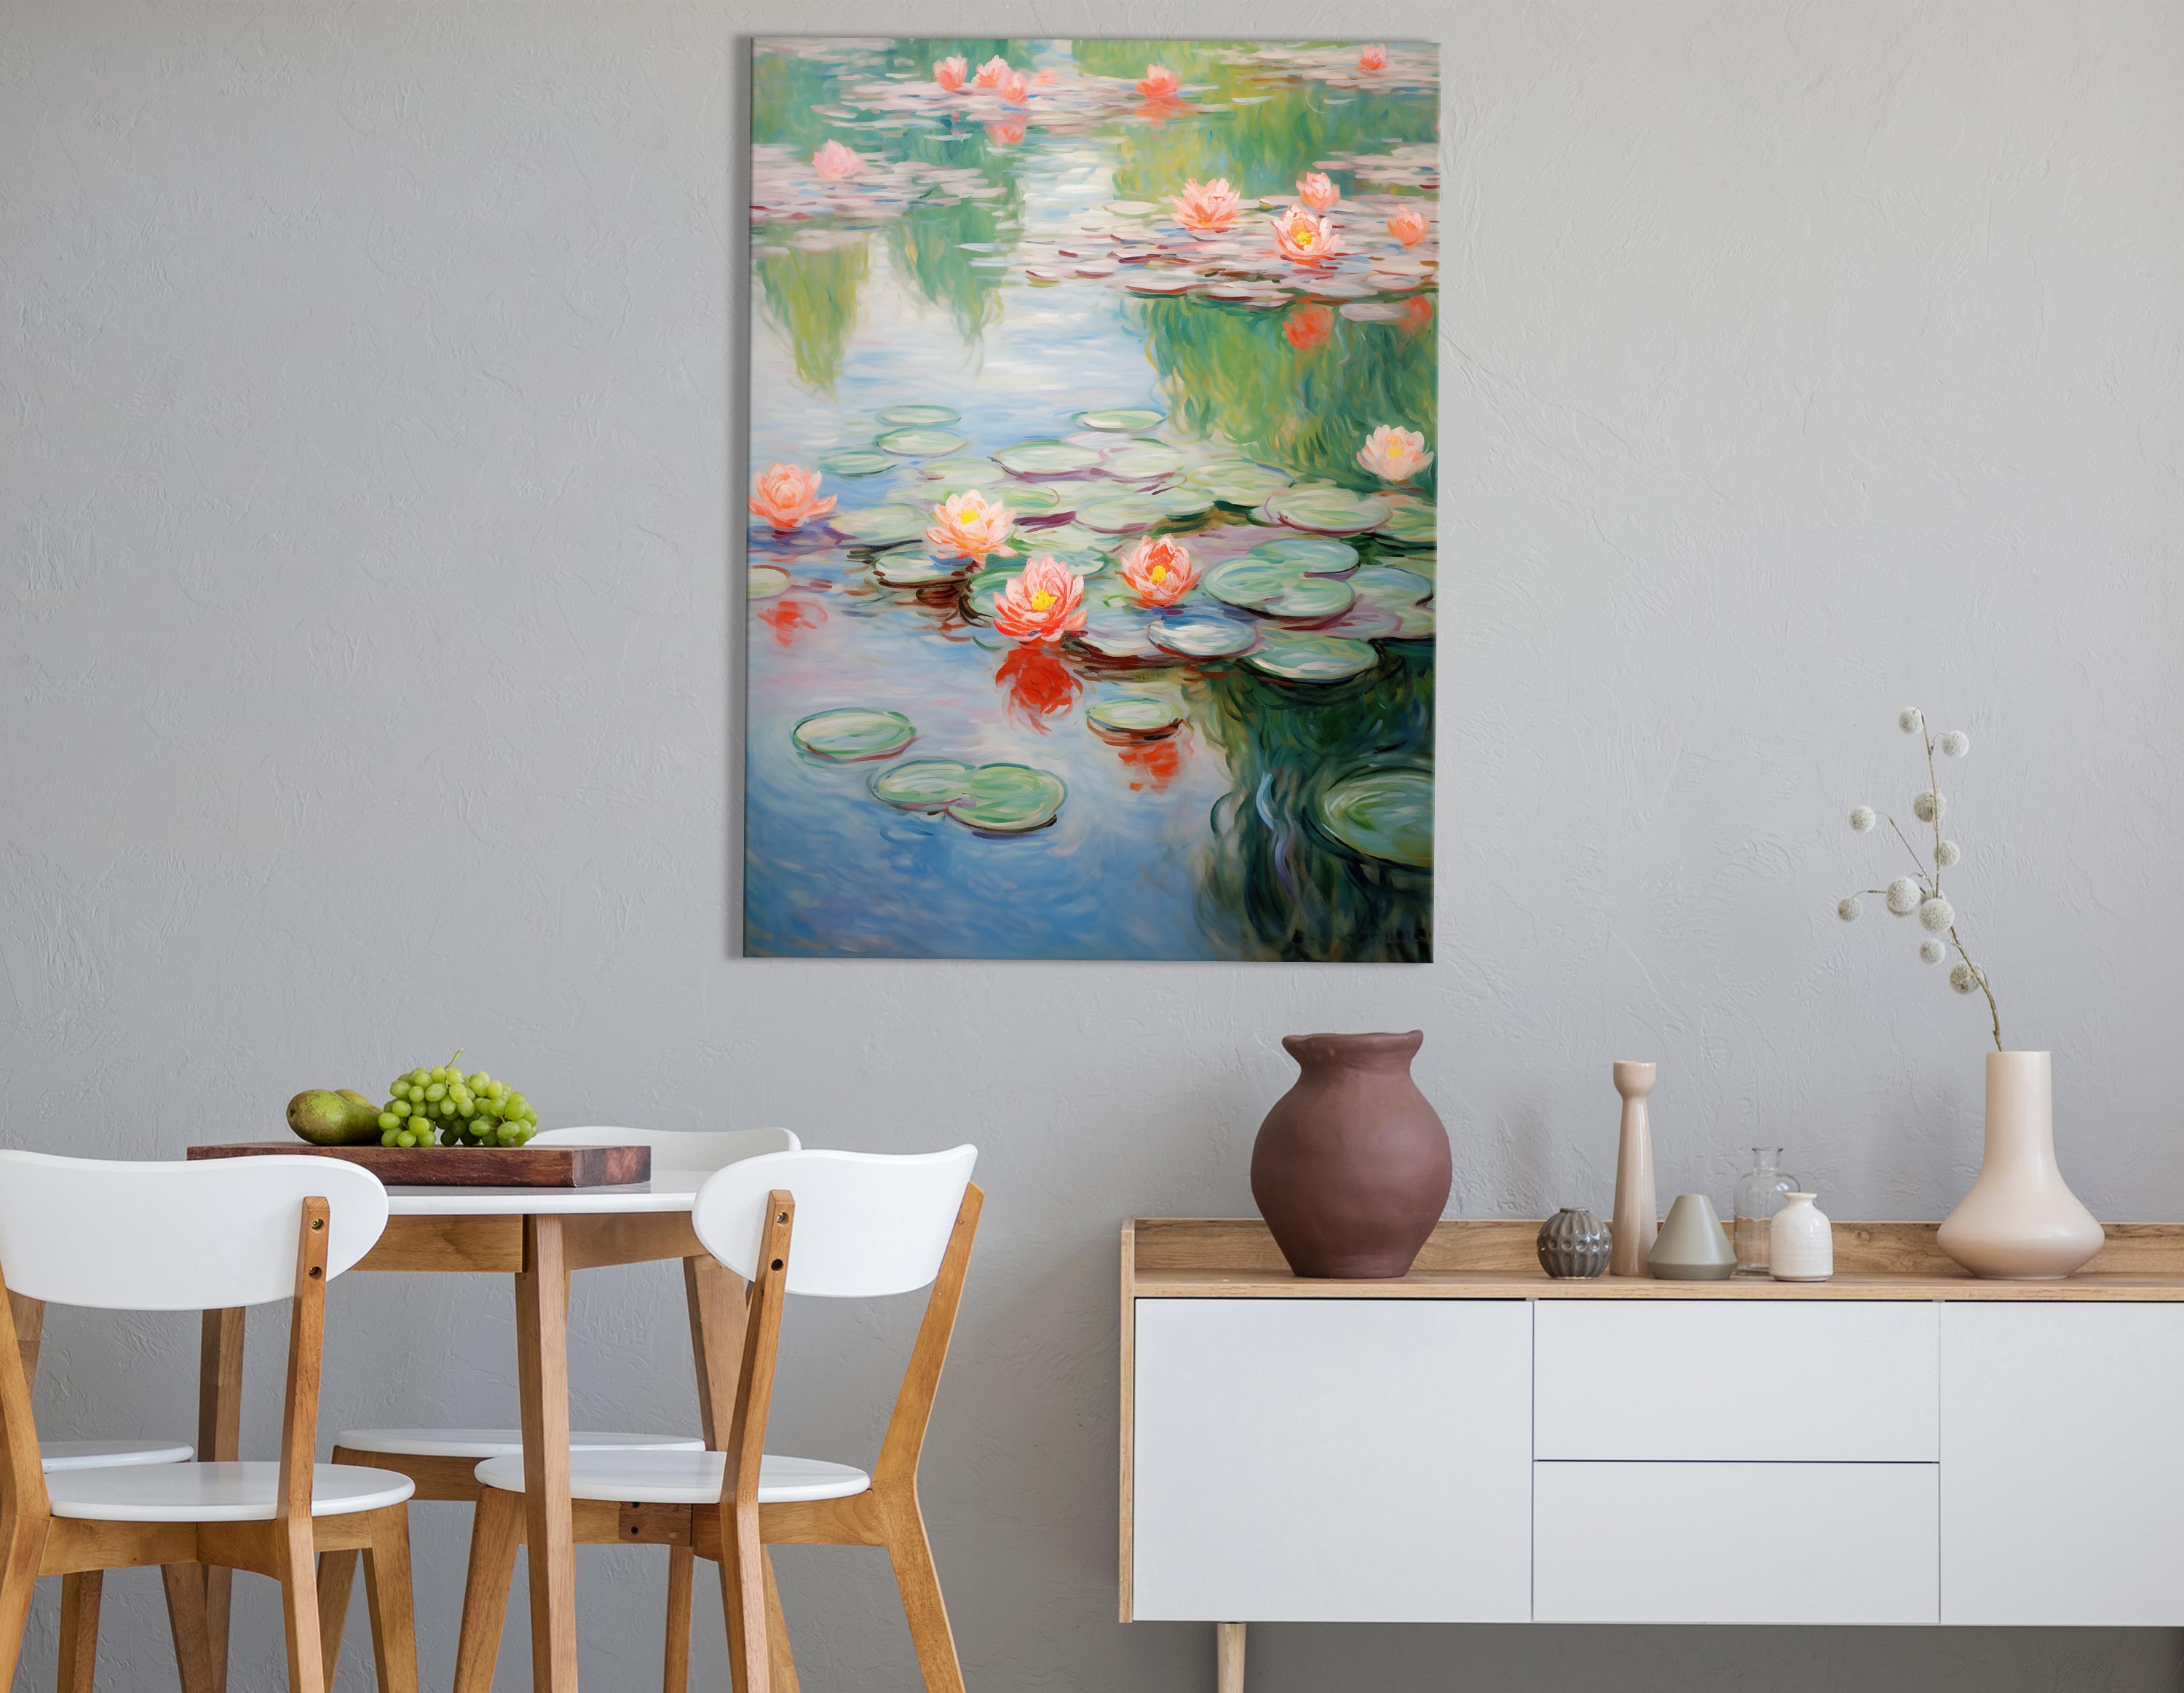 Bring a serene atmosphere to your home with this tranquil canvas print, capturing the delicate beauty of water lilies floating on a reflective pond. The interplay of soft pinks and greens against the water's hues offers a refreshing and calming wall art piece perfect for creating a relaxing space.